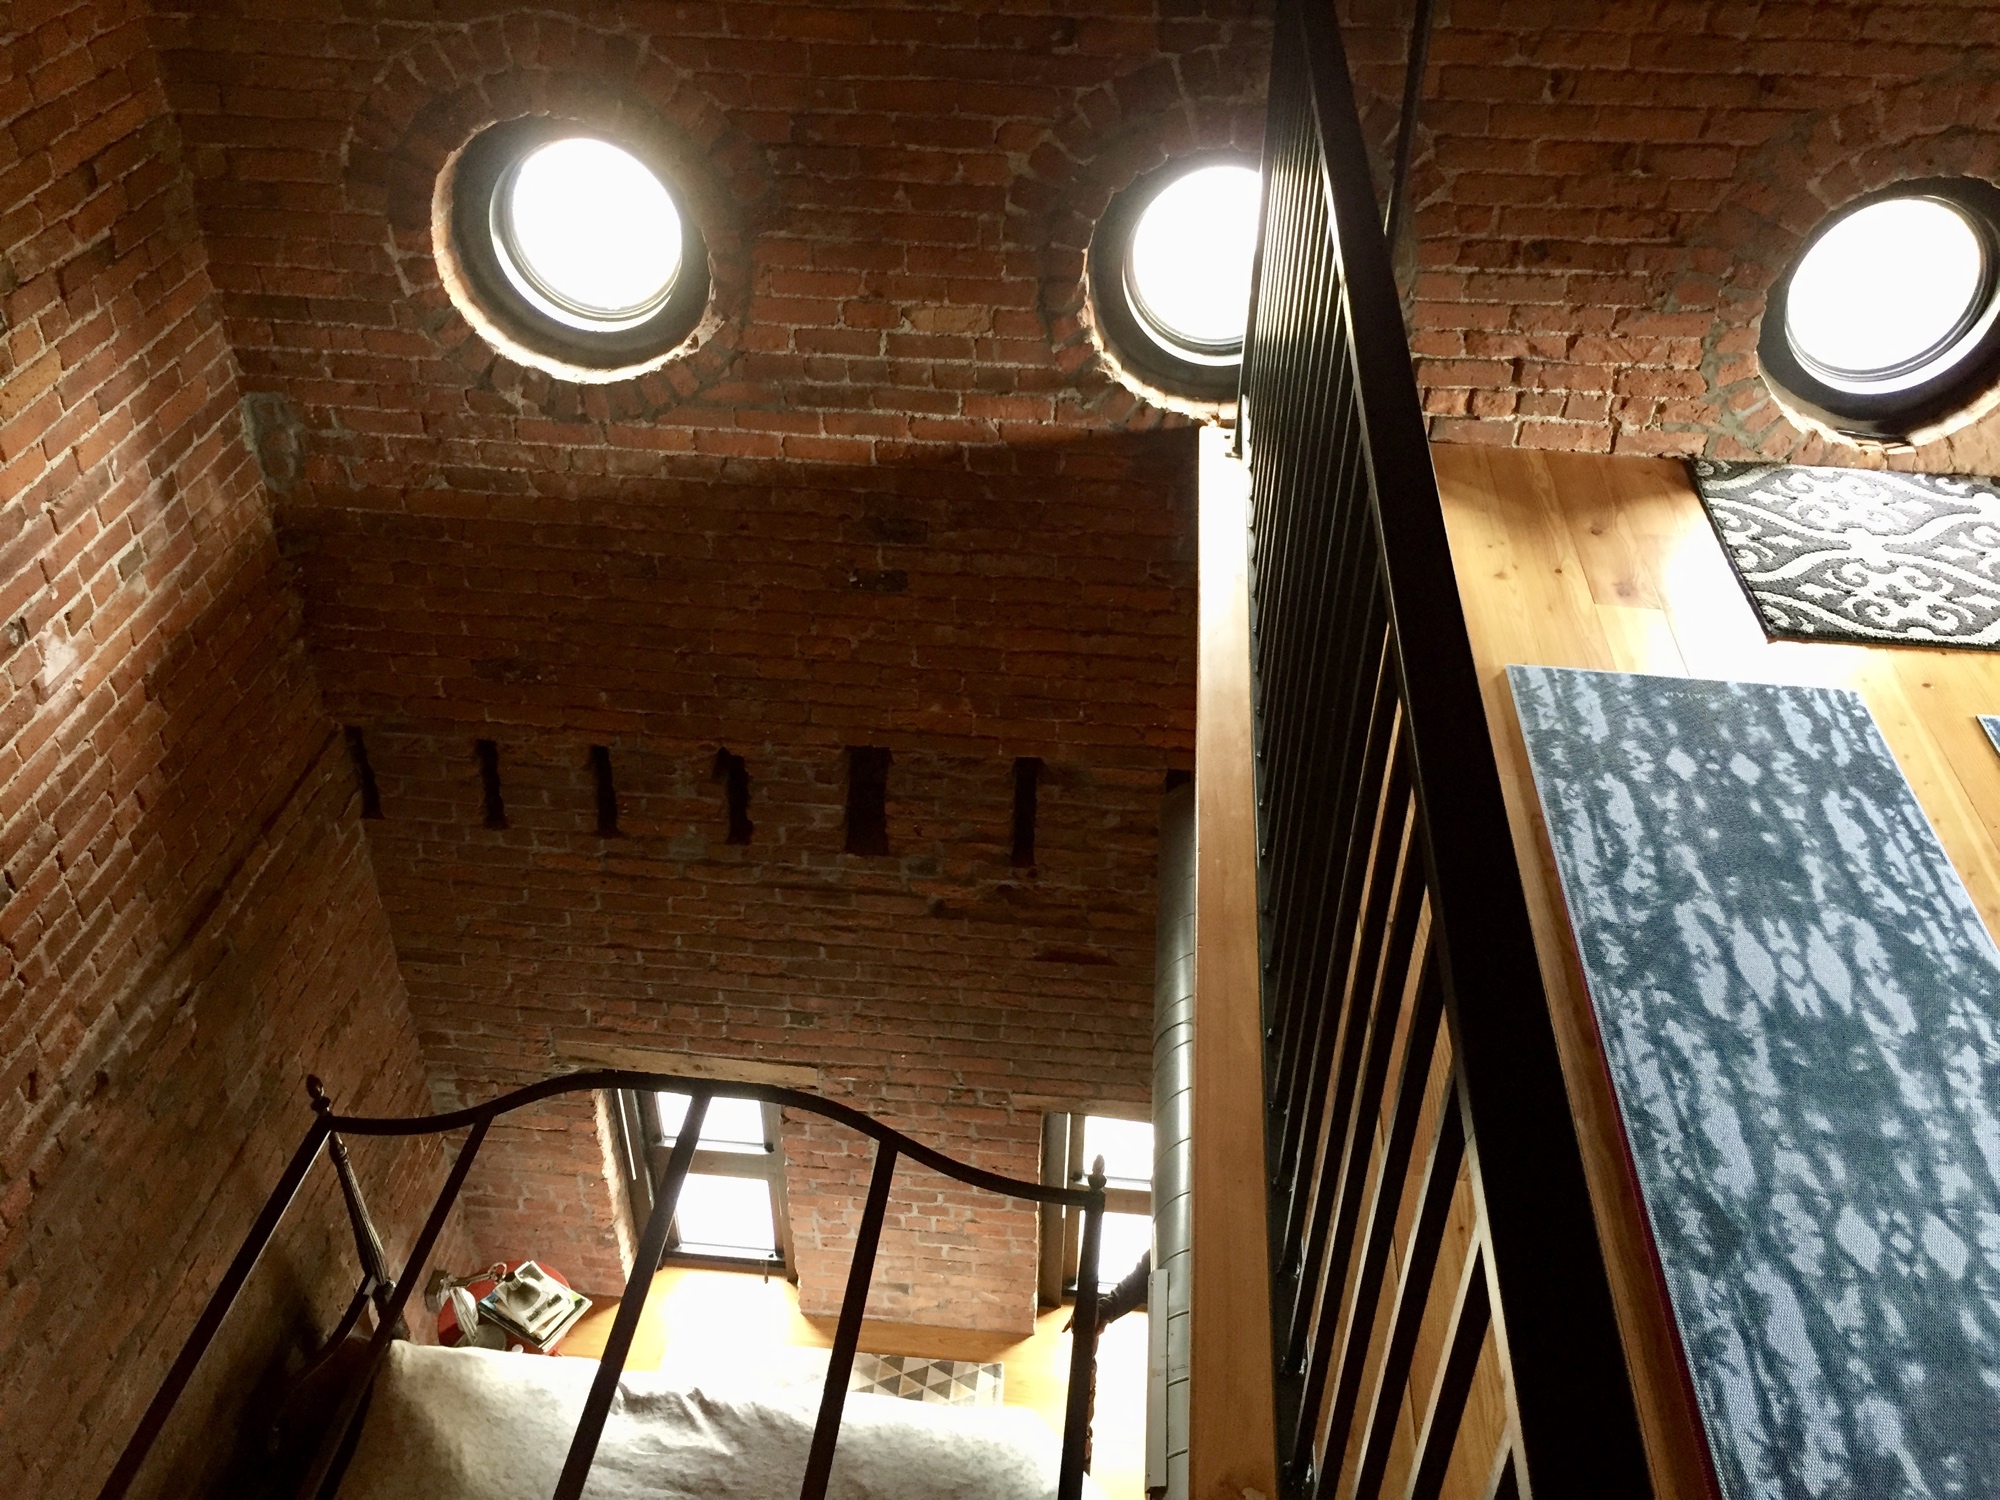  30 foot ceilings and a loft inside the steeple of this former Victorian church building Photo by Barbra Revill 